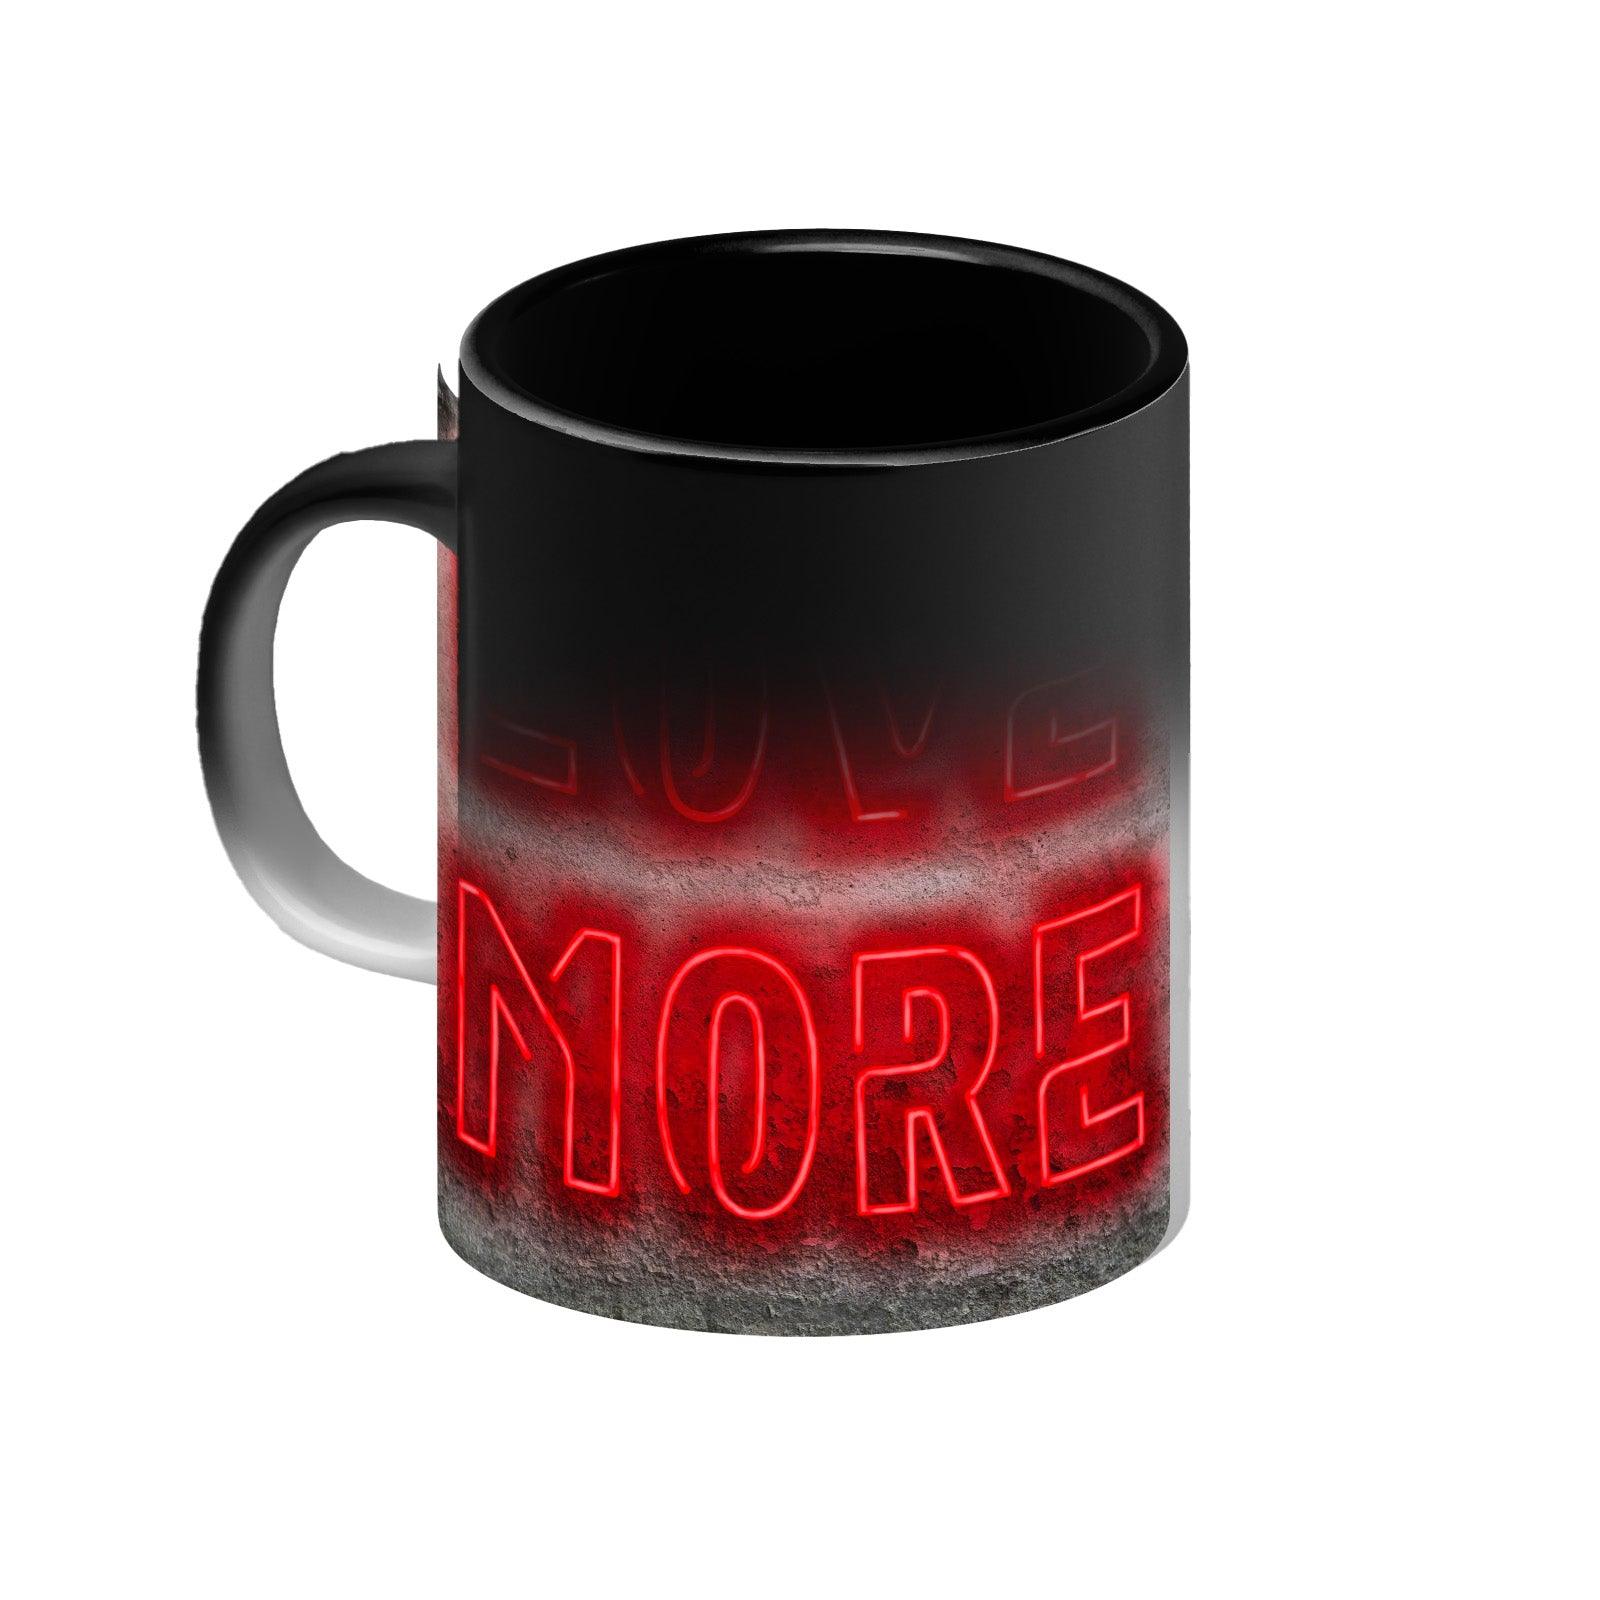 Heat Activated Magic Mug Heat Activated Magic Mug - undefined - Qstomize.com